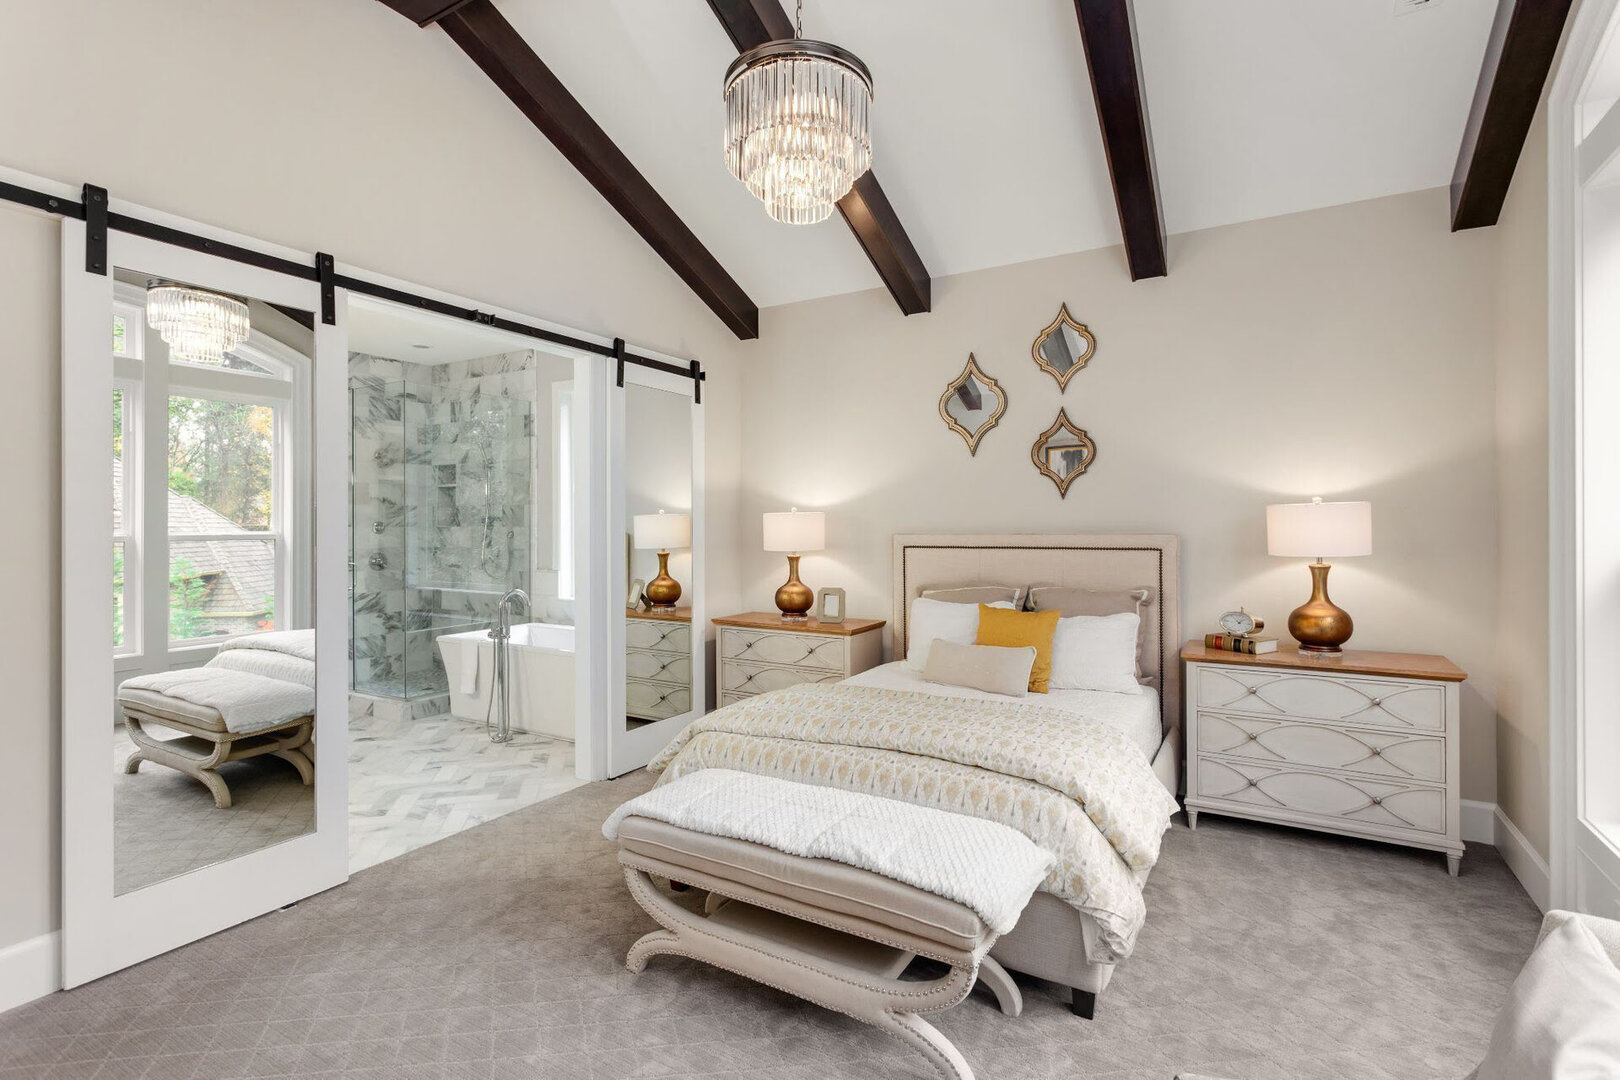 Master Bedroom Ideas With Bath: 13 Designs For A Luxurious Master Suite